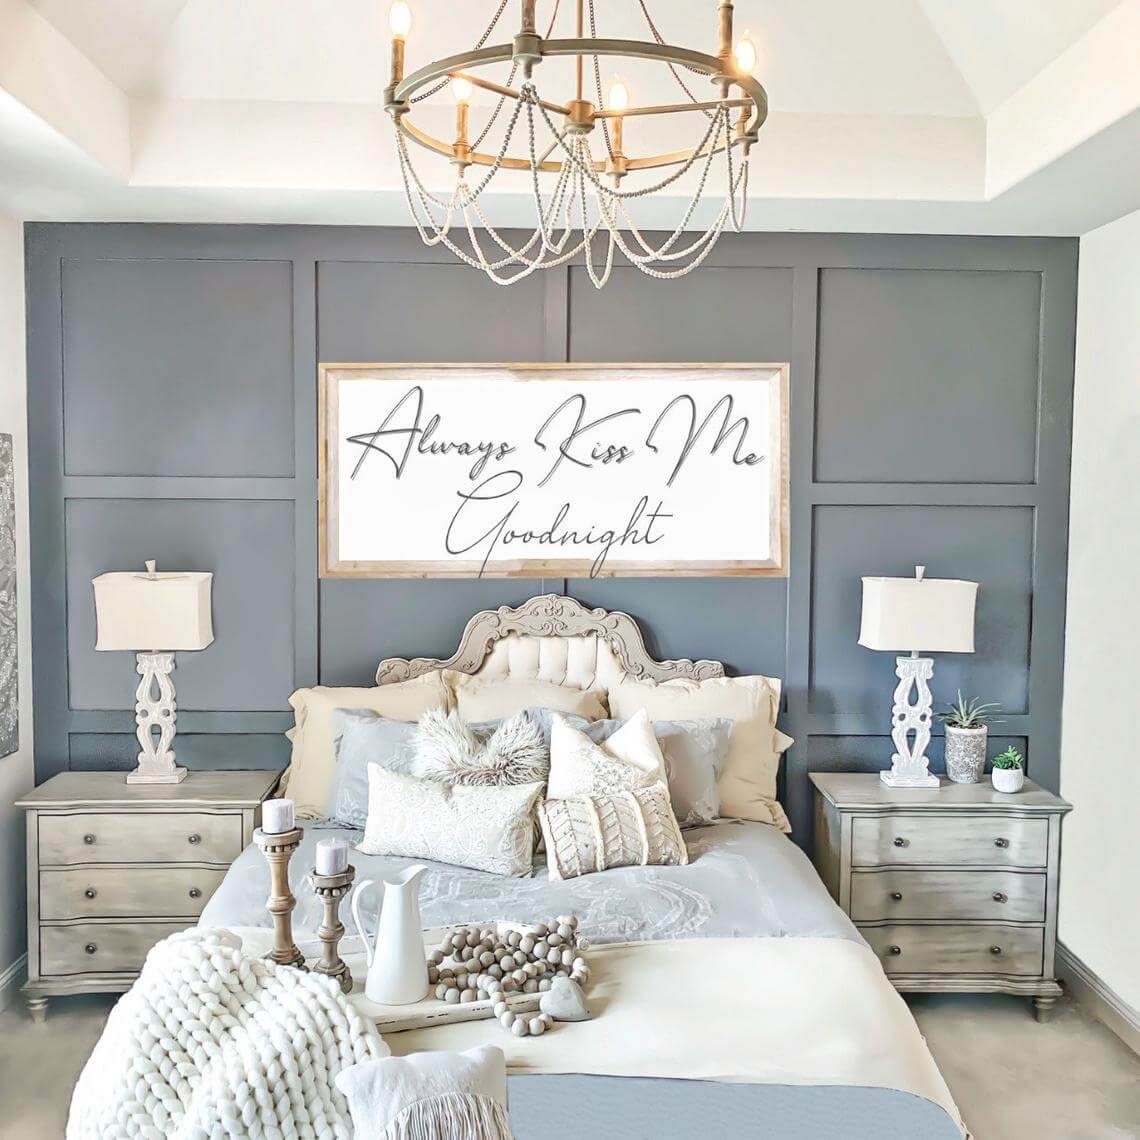 Bedroom couples sherwin williams batten peppercorn homebnc goodnight cozy wifey moss wal makeover via